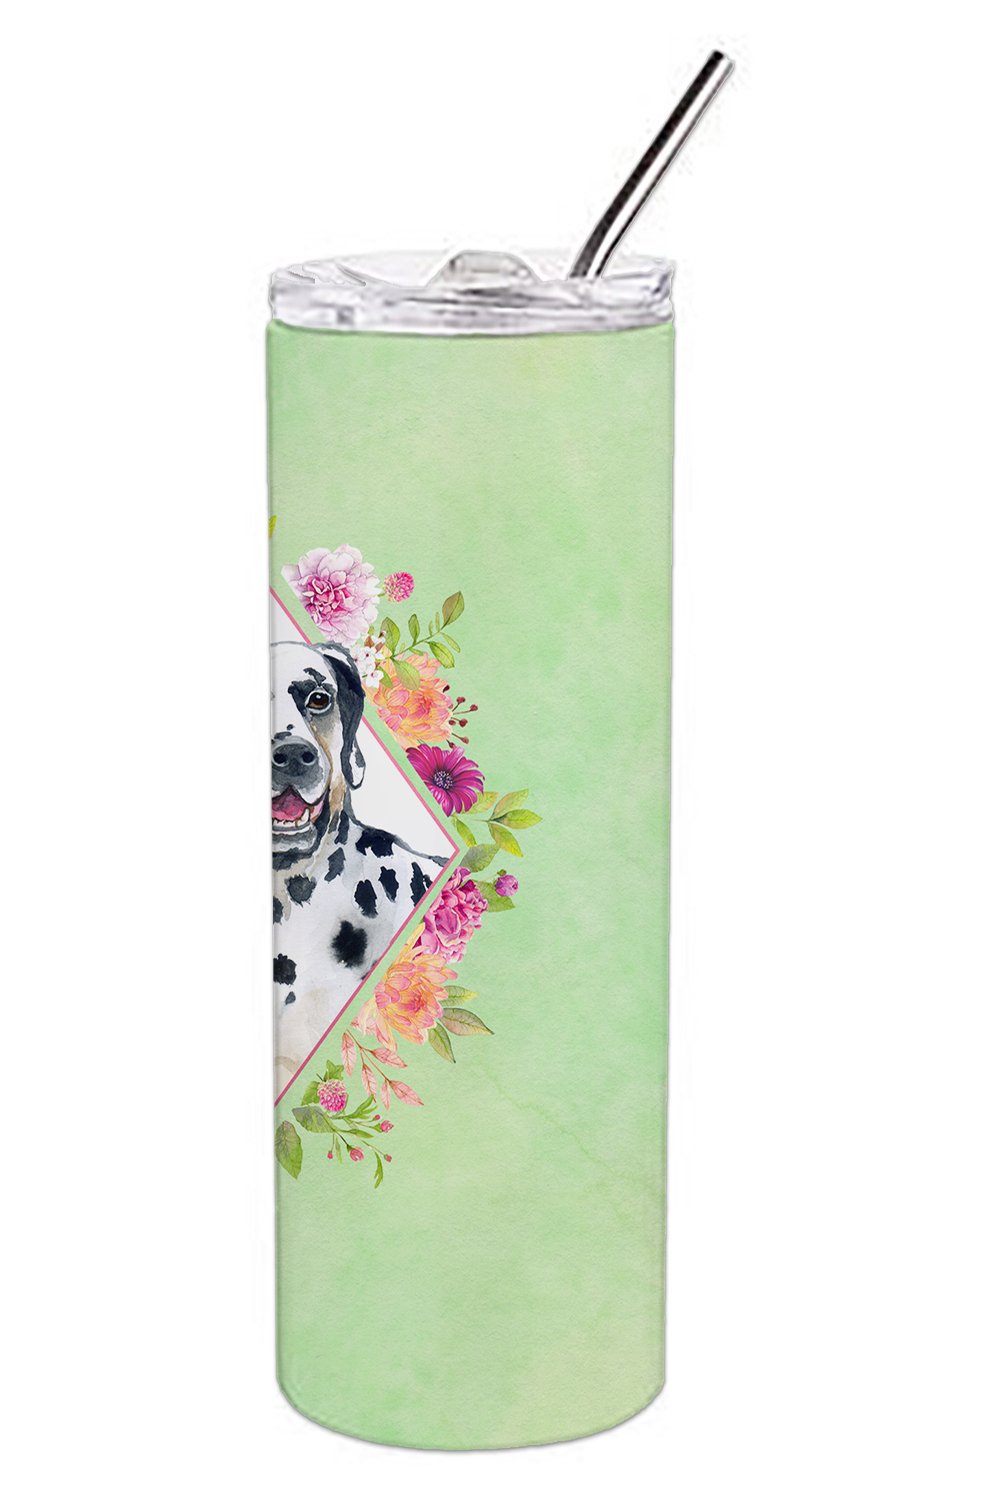 Dalmatian Green Flowers Double Walled Stainless Steel 20 oz Skinny Tumbler CK4297TBL20 by Caroline's Treasures